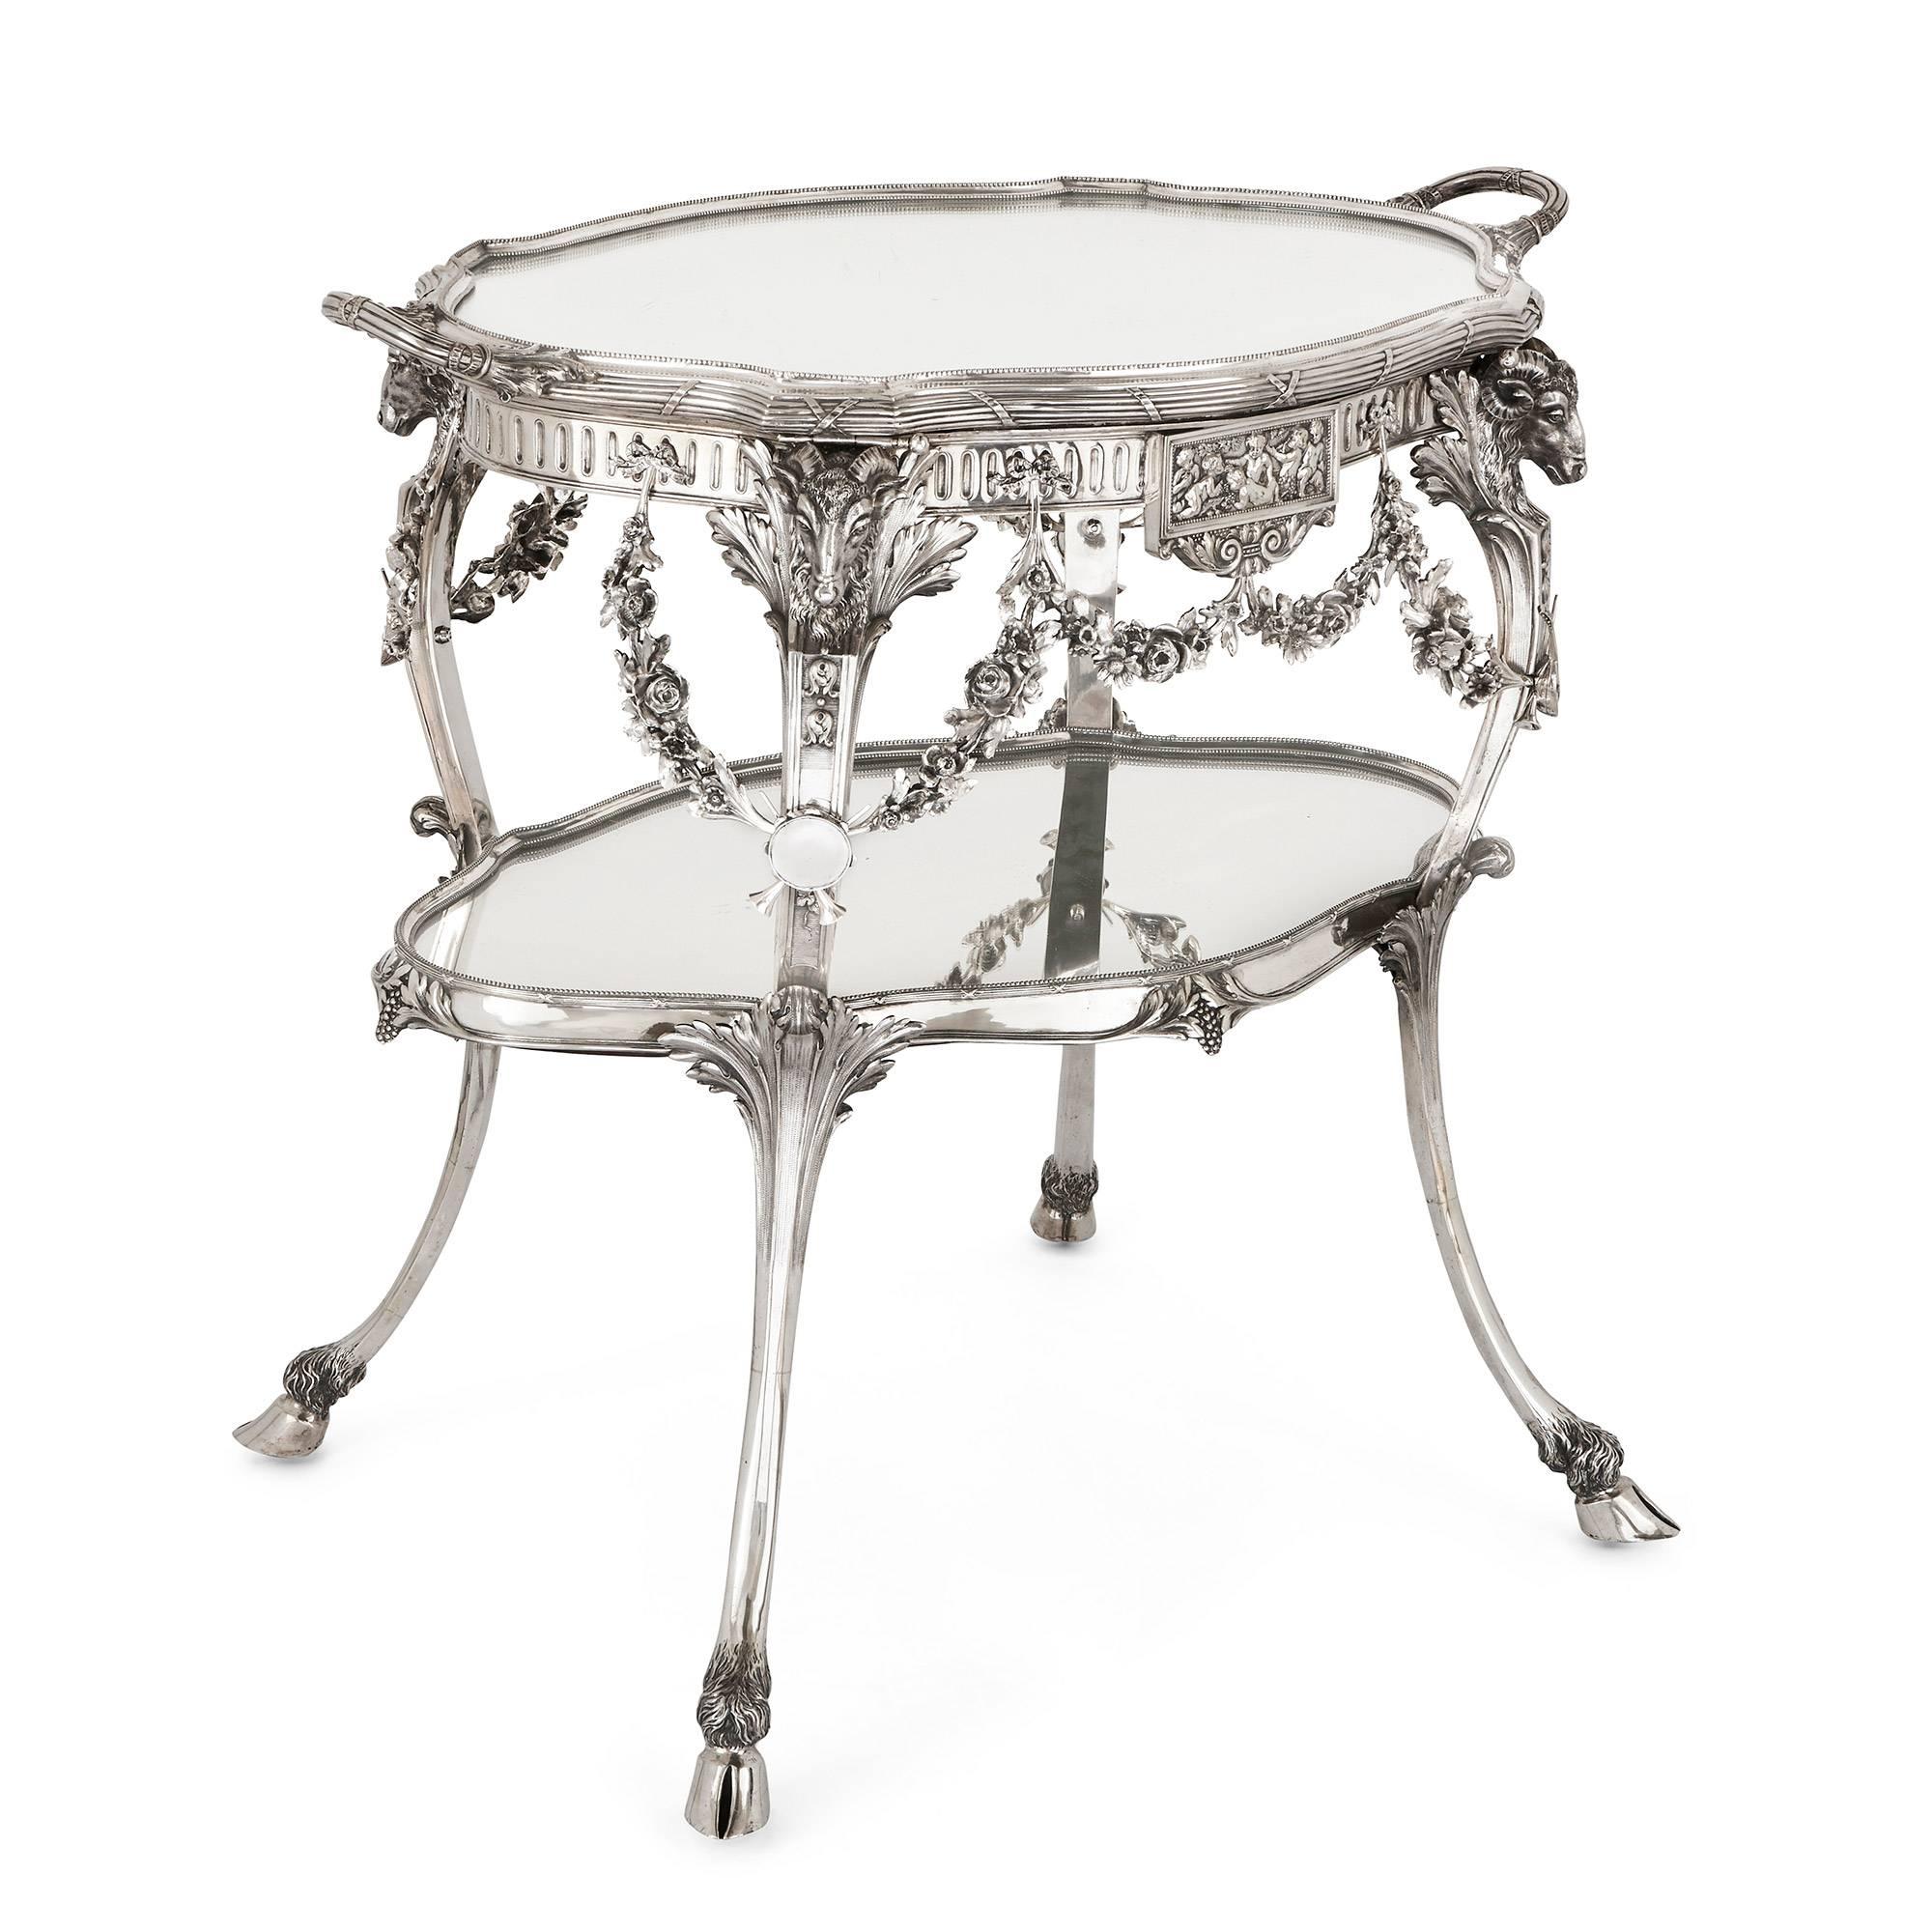 Made of solid silver, raised on four legs topped with ram's head and centred with a carved relief plaque depicting cherubs, the oval shaped tiers surfaced with mirrored glass, the top tier in detachable tray form with beaded rim and twin handles,